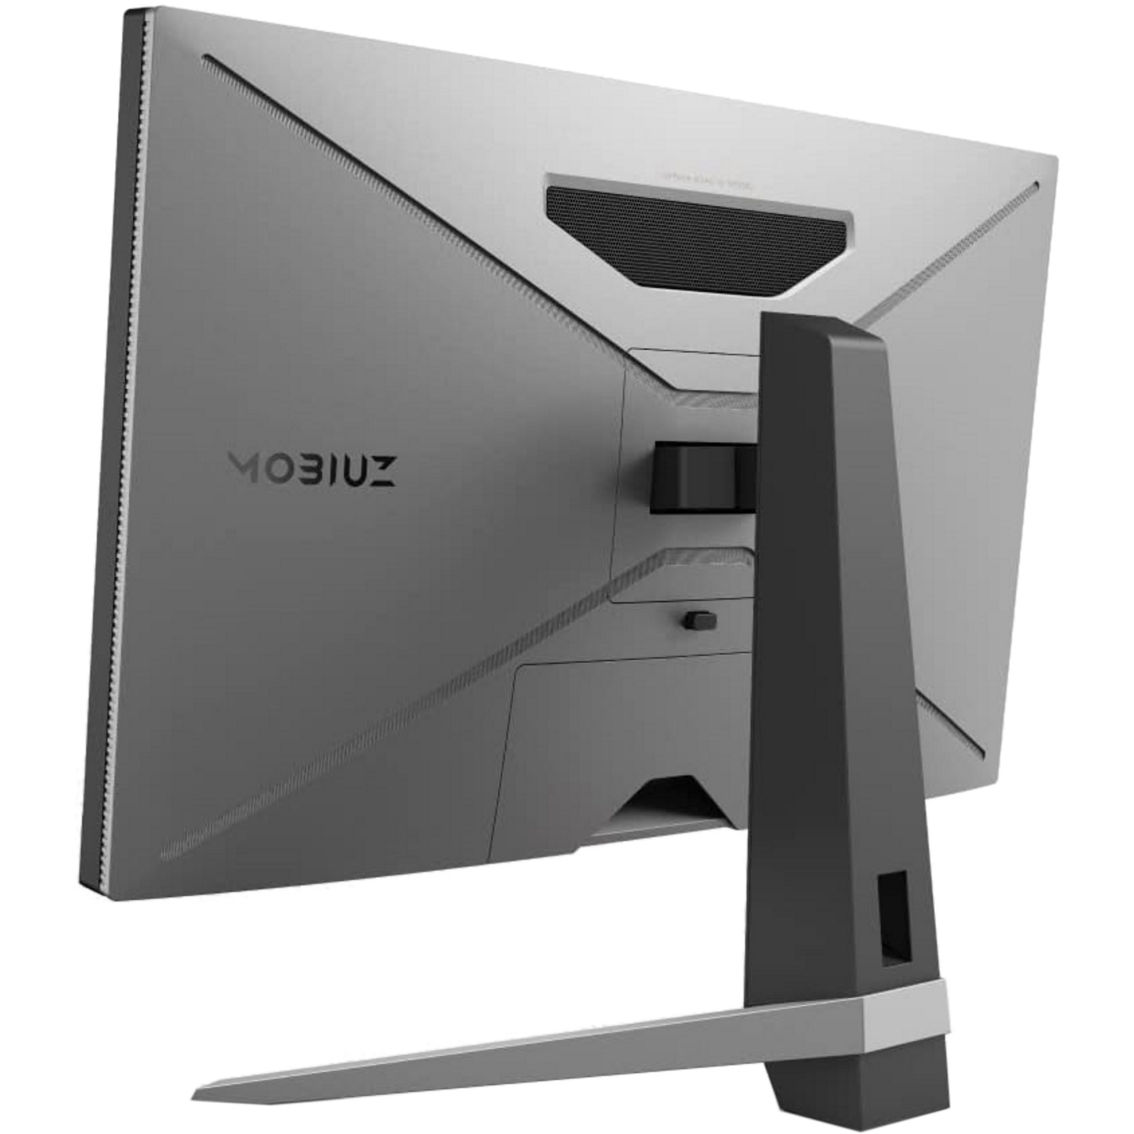 BenQ MOBIUZ 27 in. HDR 240 Hz Gaming Monitor EX270M - Image 5 of 7